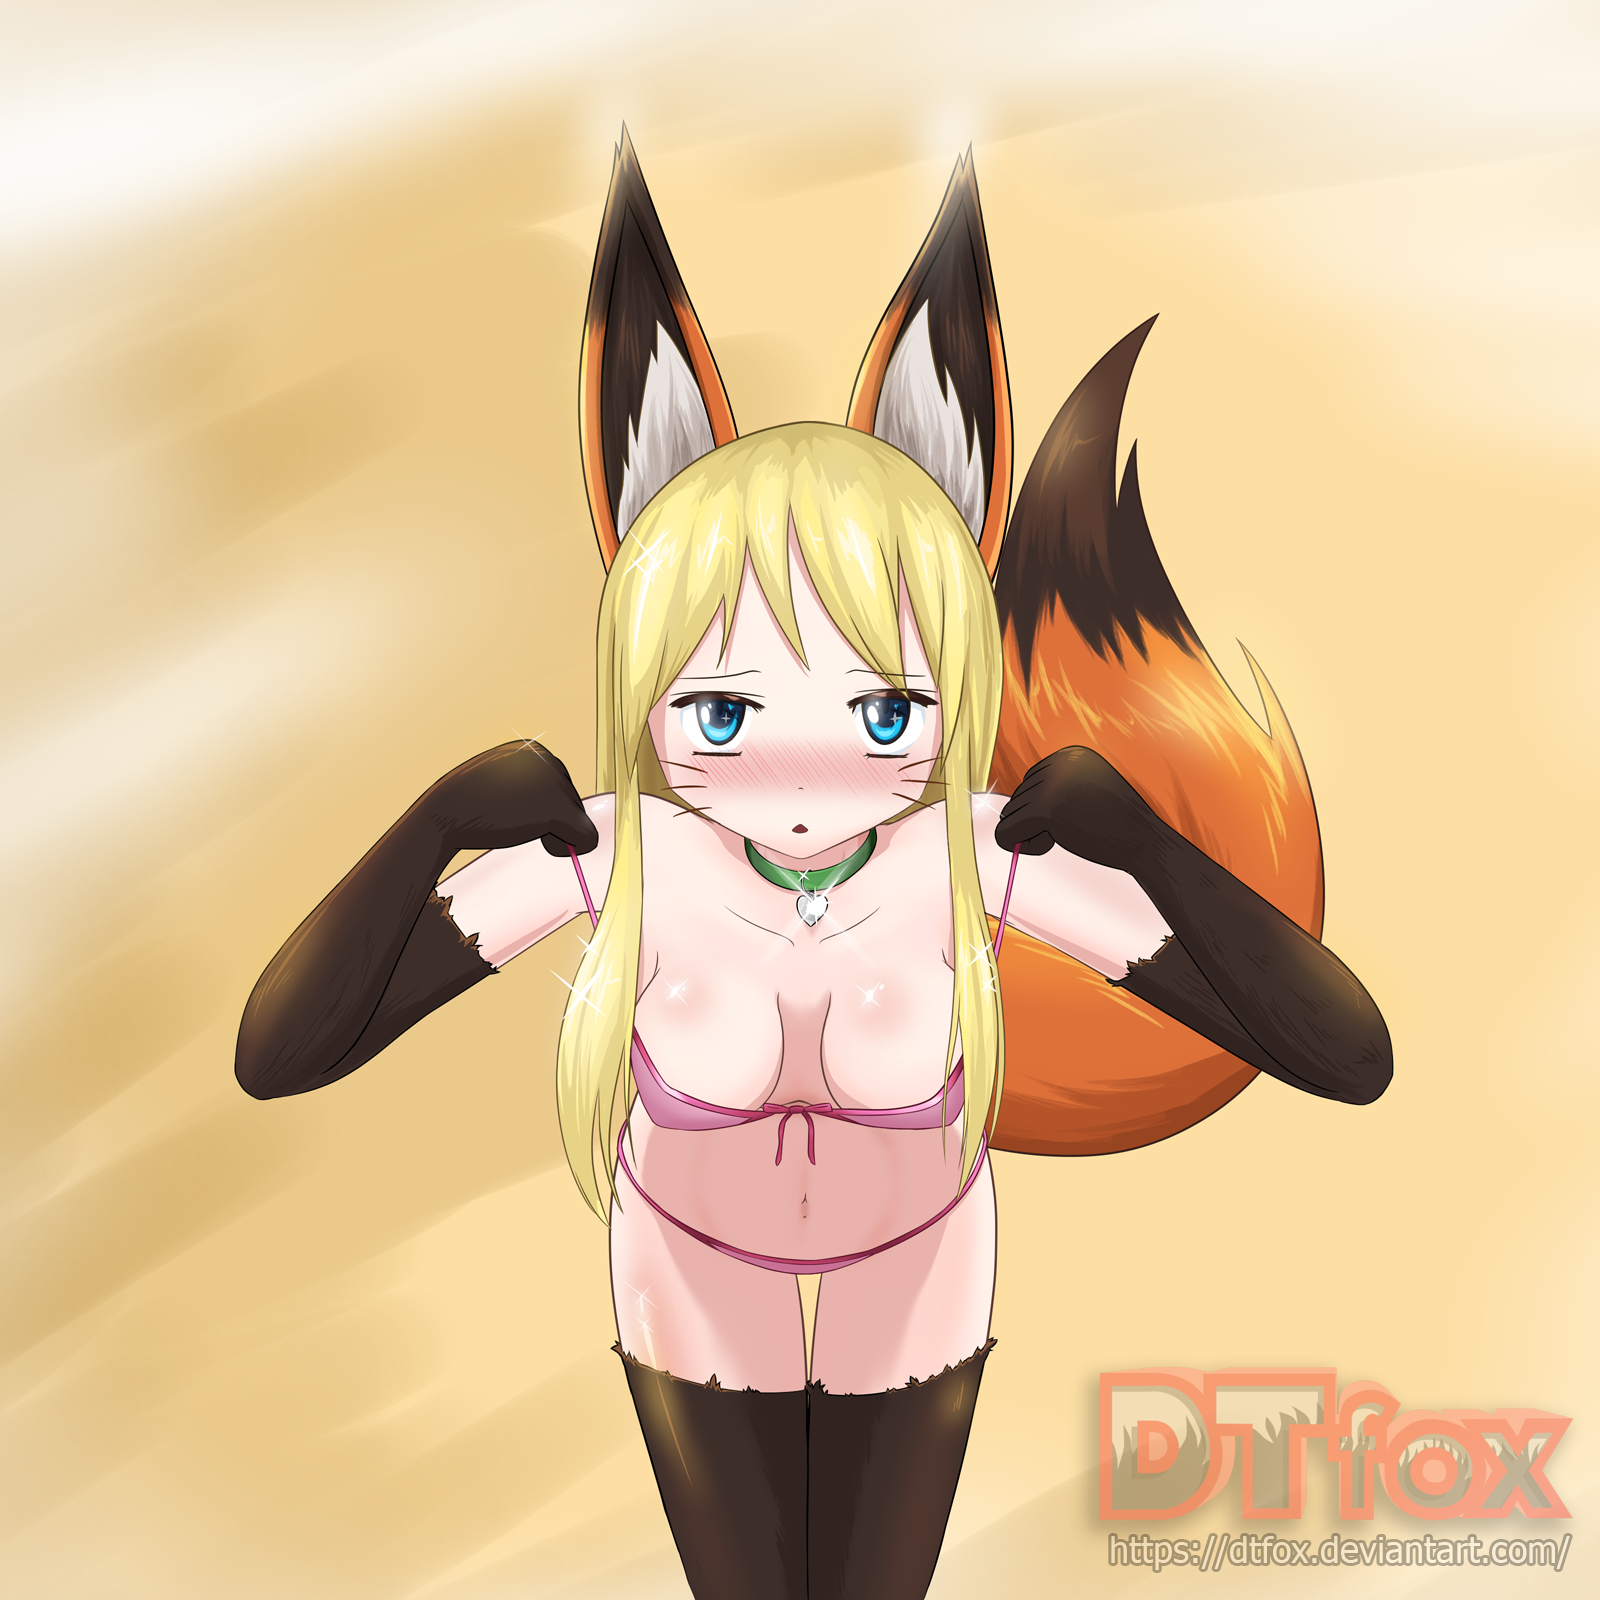 A fox girl takes off her bra as she leans forward to expose her breasts.